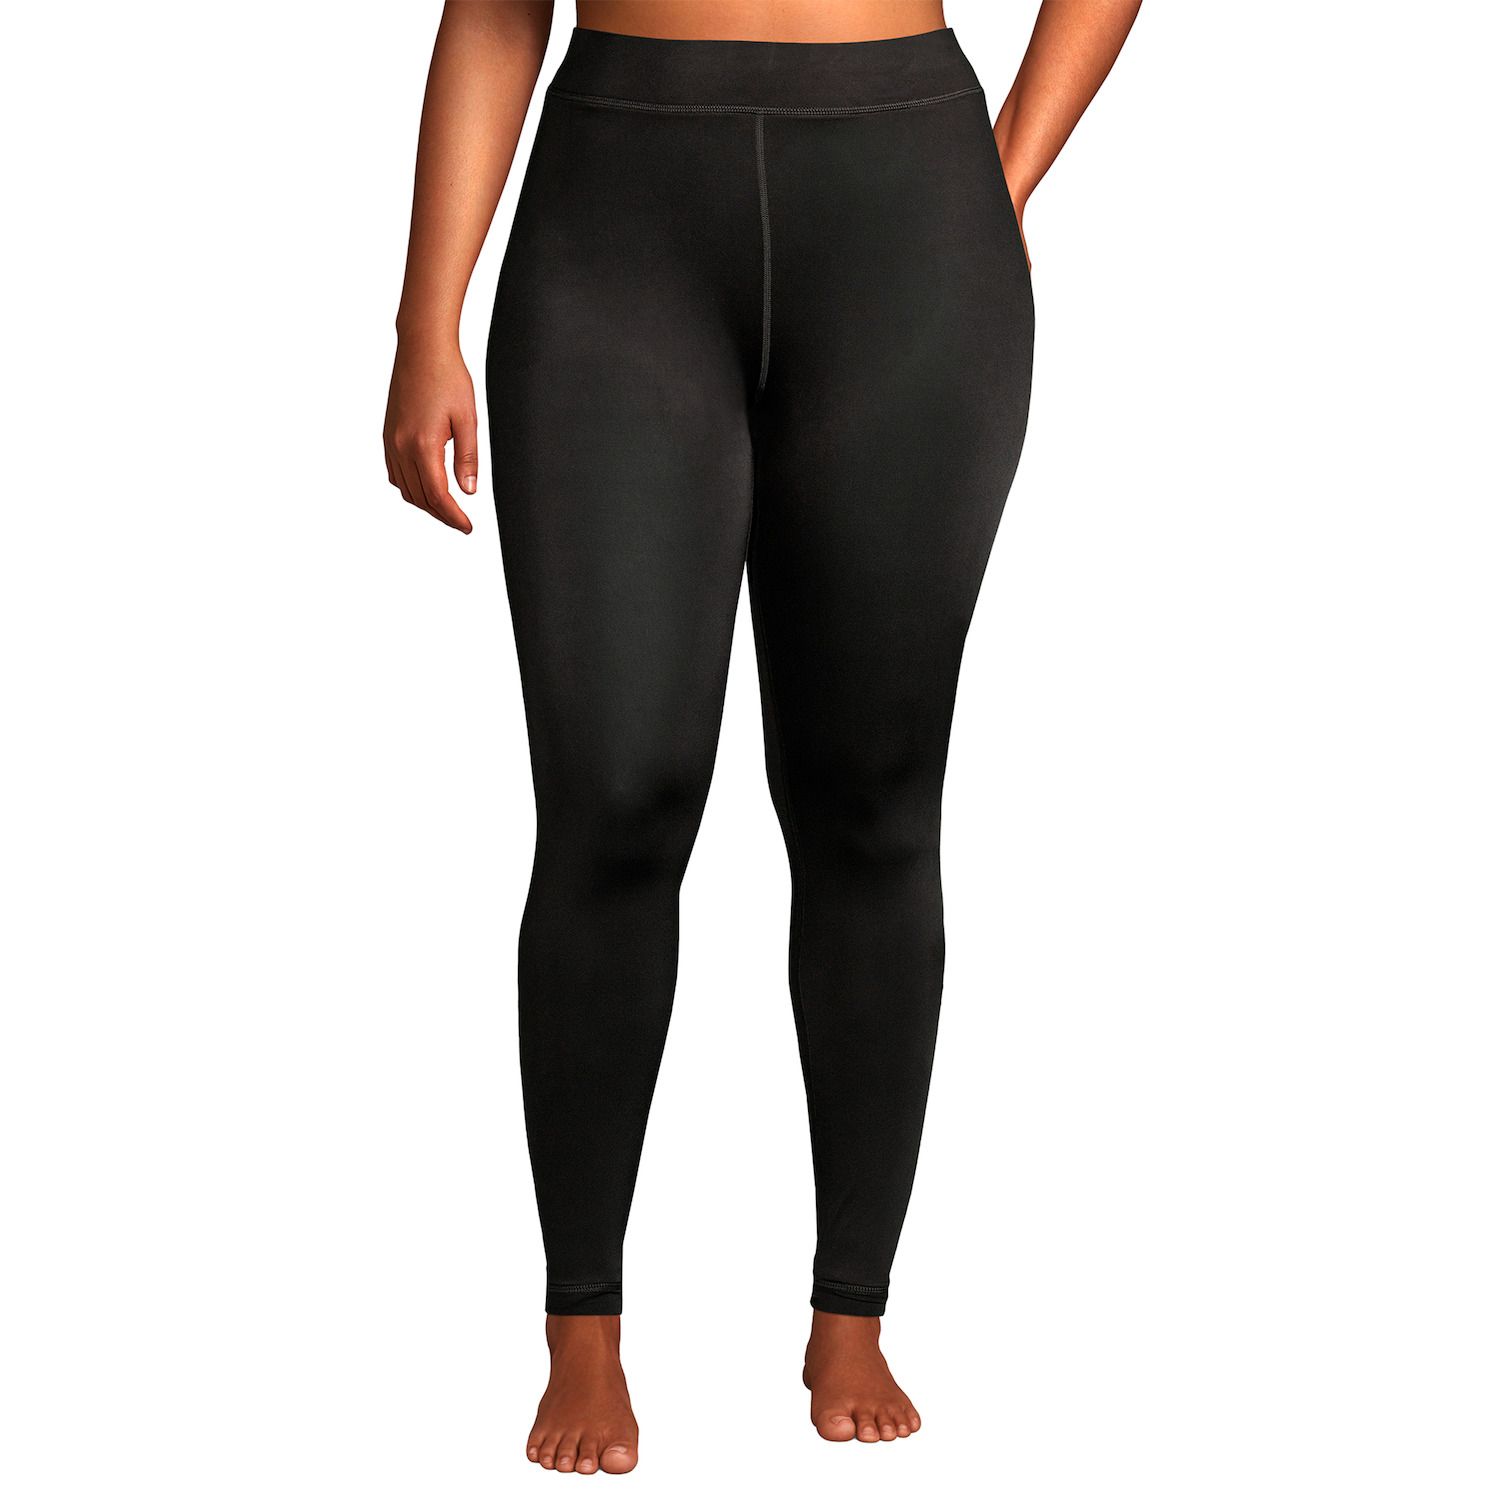 Image for Lands' End Plus Size Thermaskin Heat Pants at Kohl's.